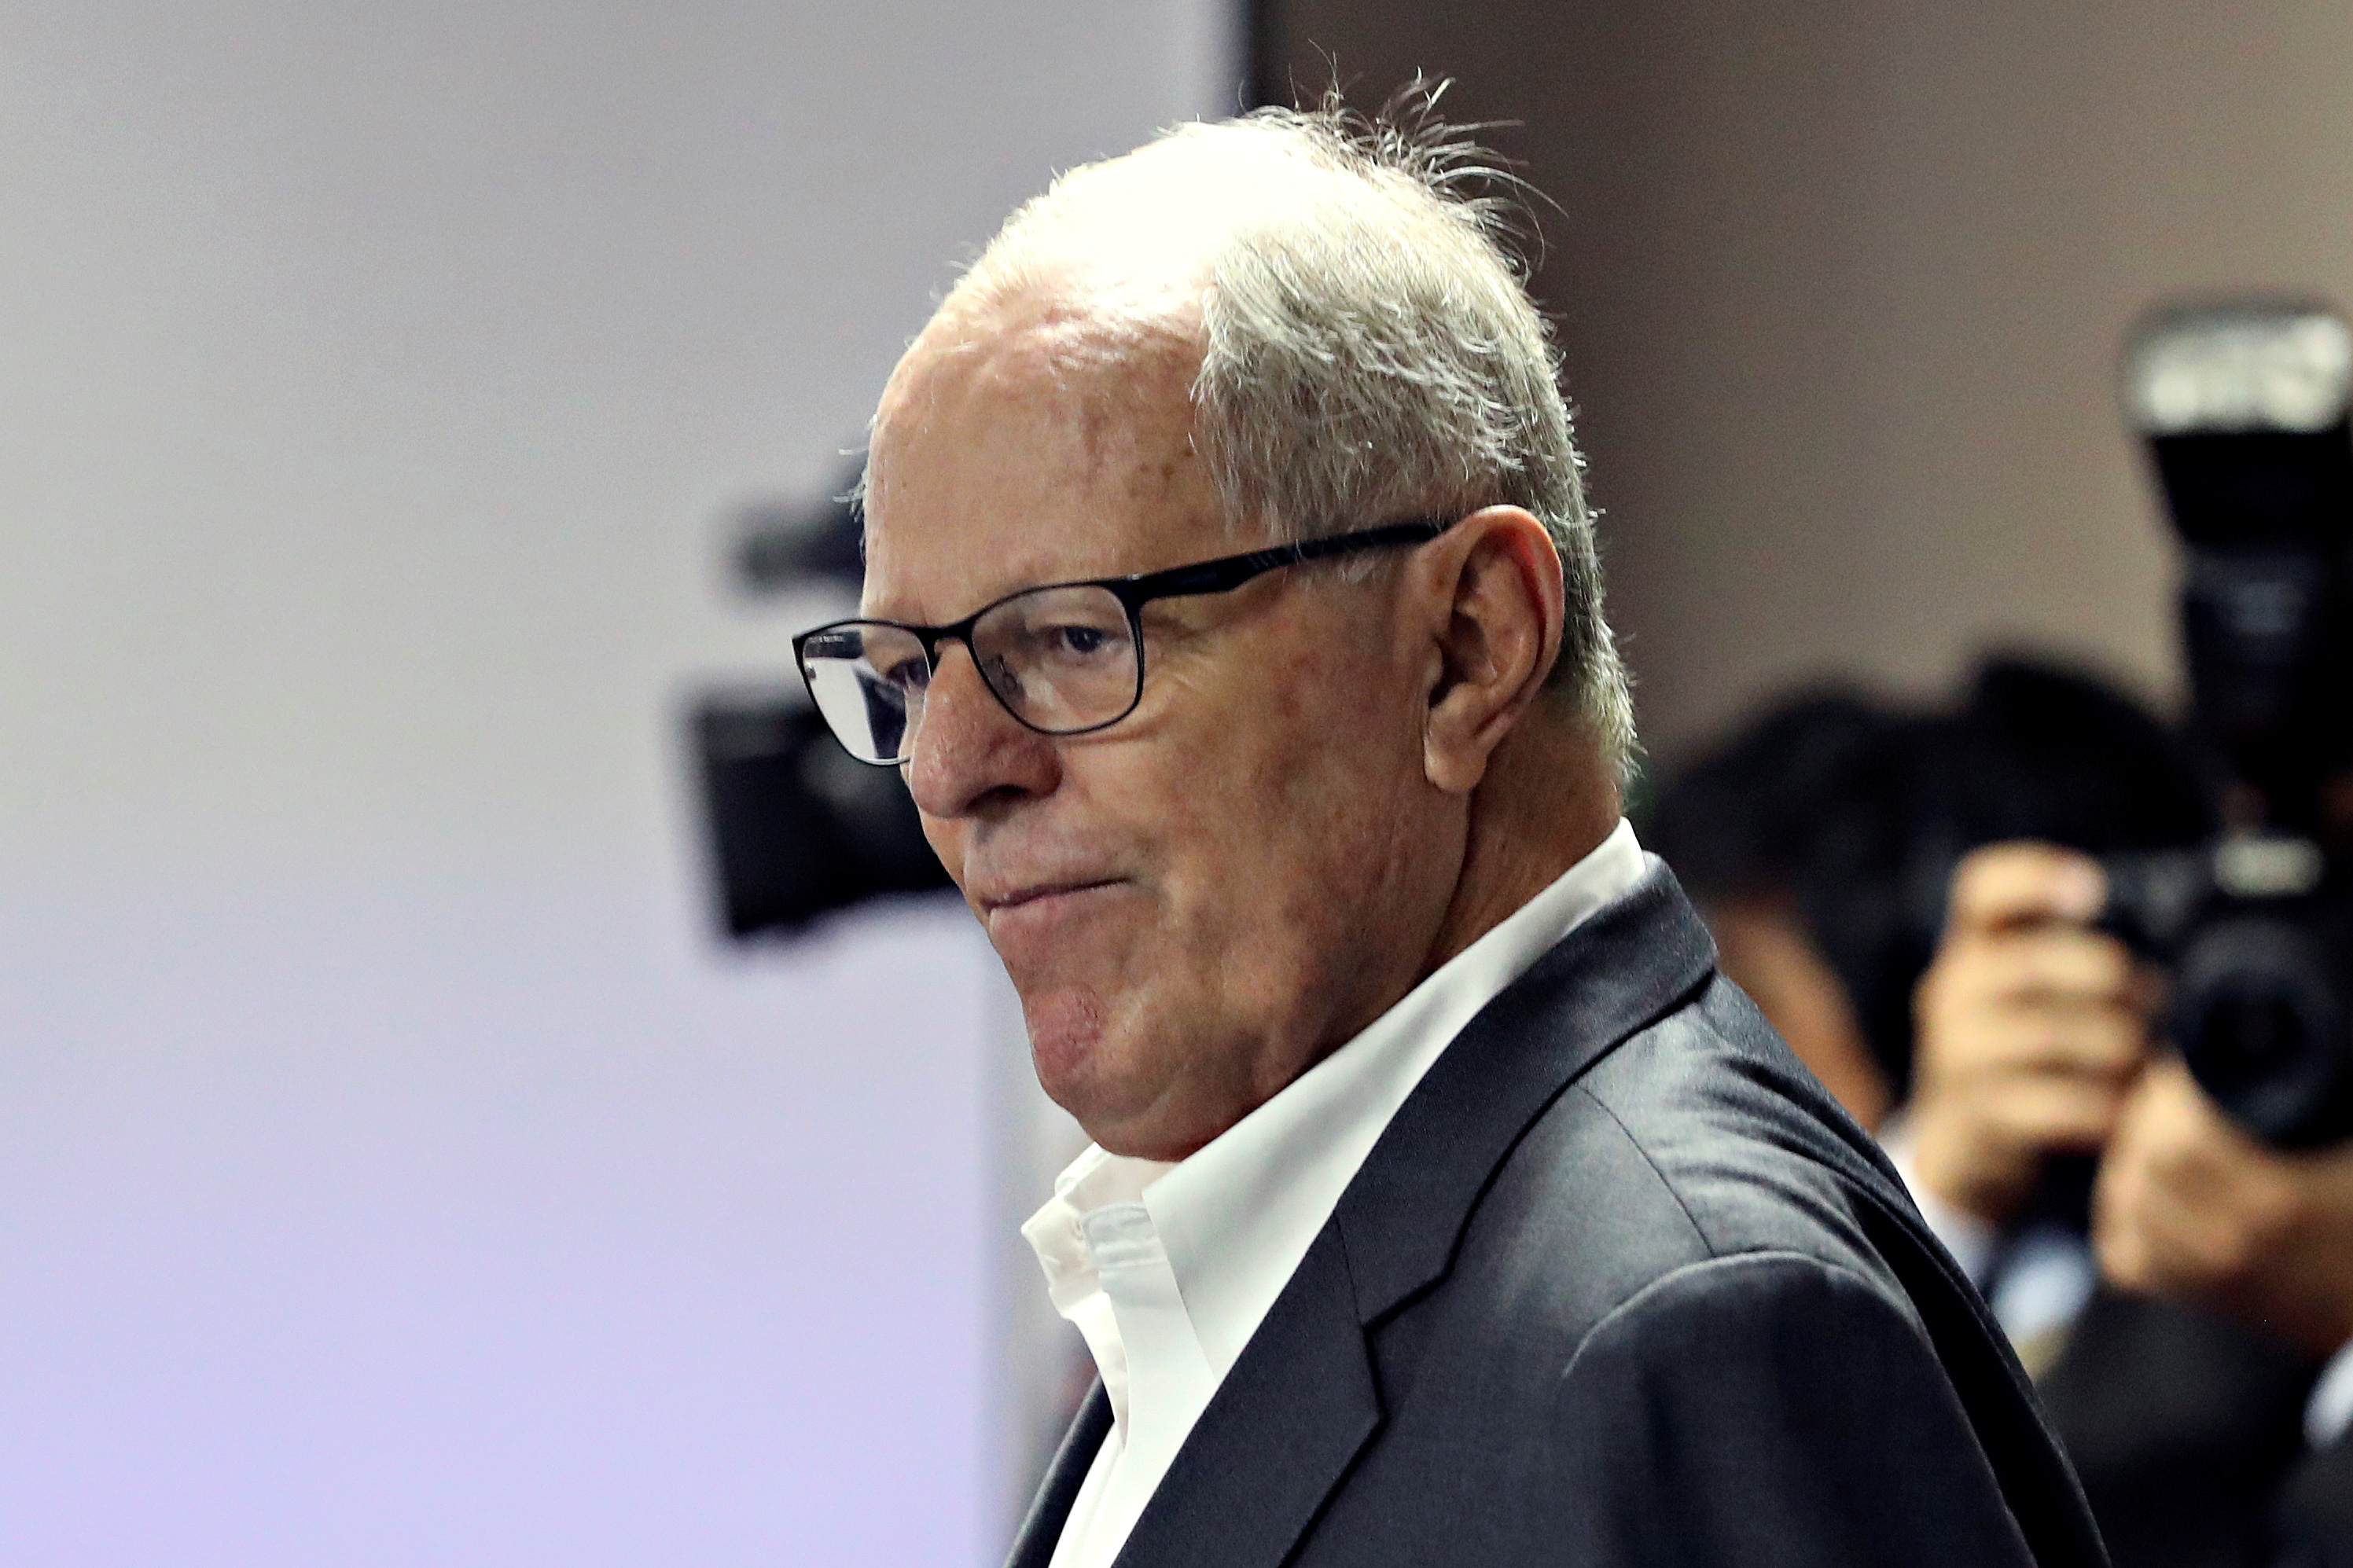 Peru's former President Pedro Pablo Kuczynski is seen at a court, after his arrest as part of an investigation into money laundering, in Lima